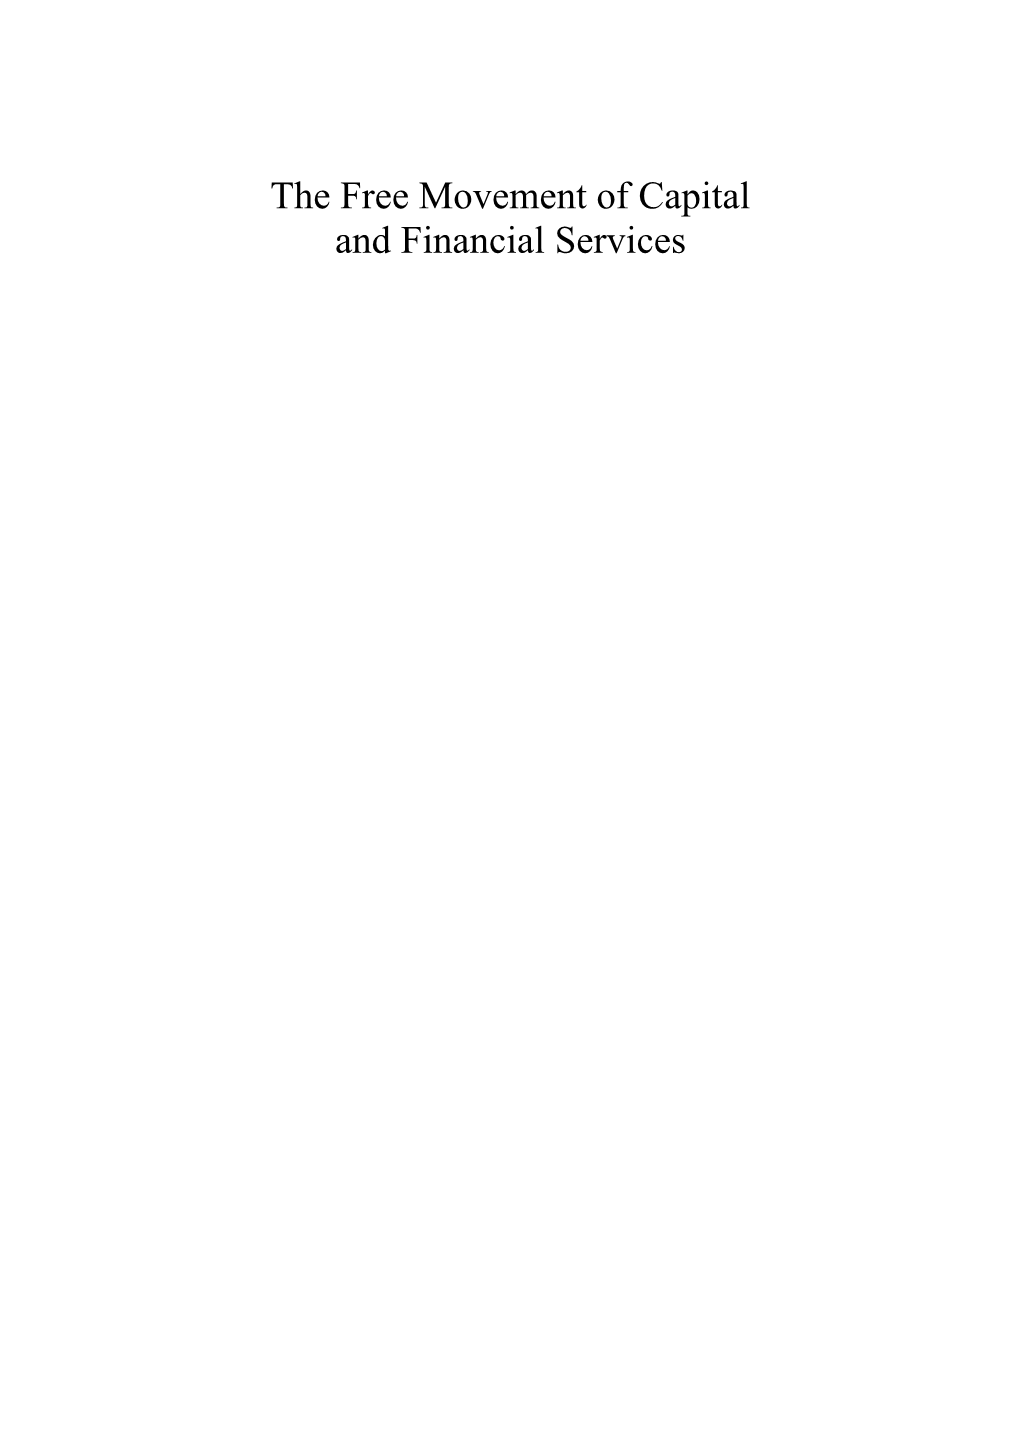 The Free Movement of Capital and Financial Services: an Exposition?